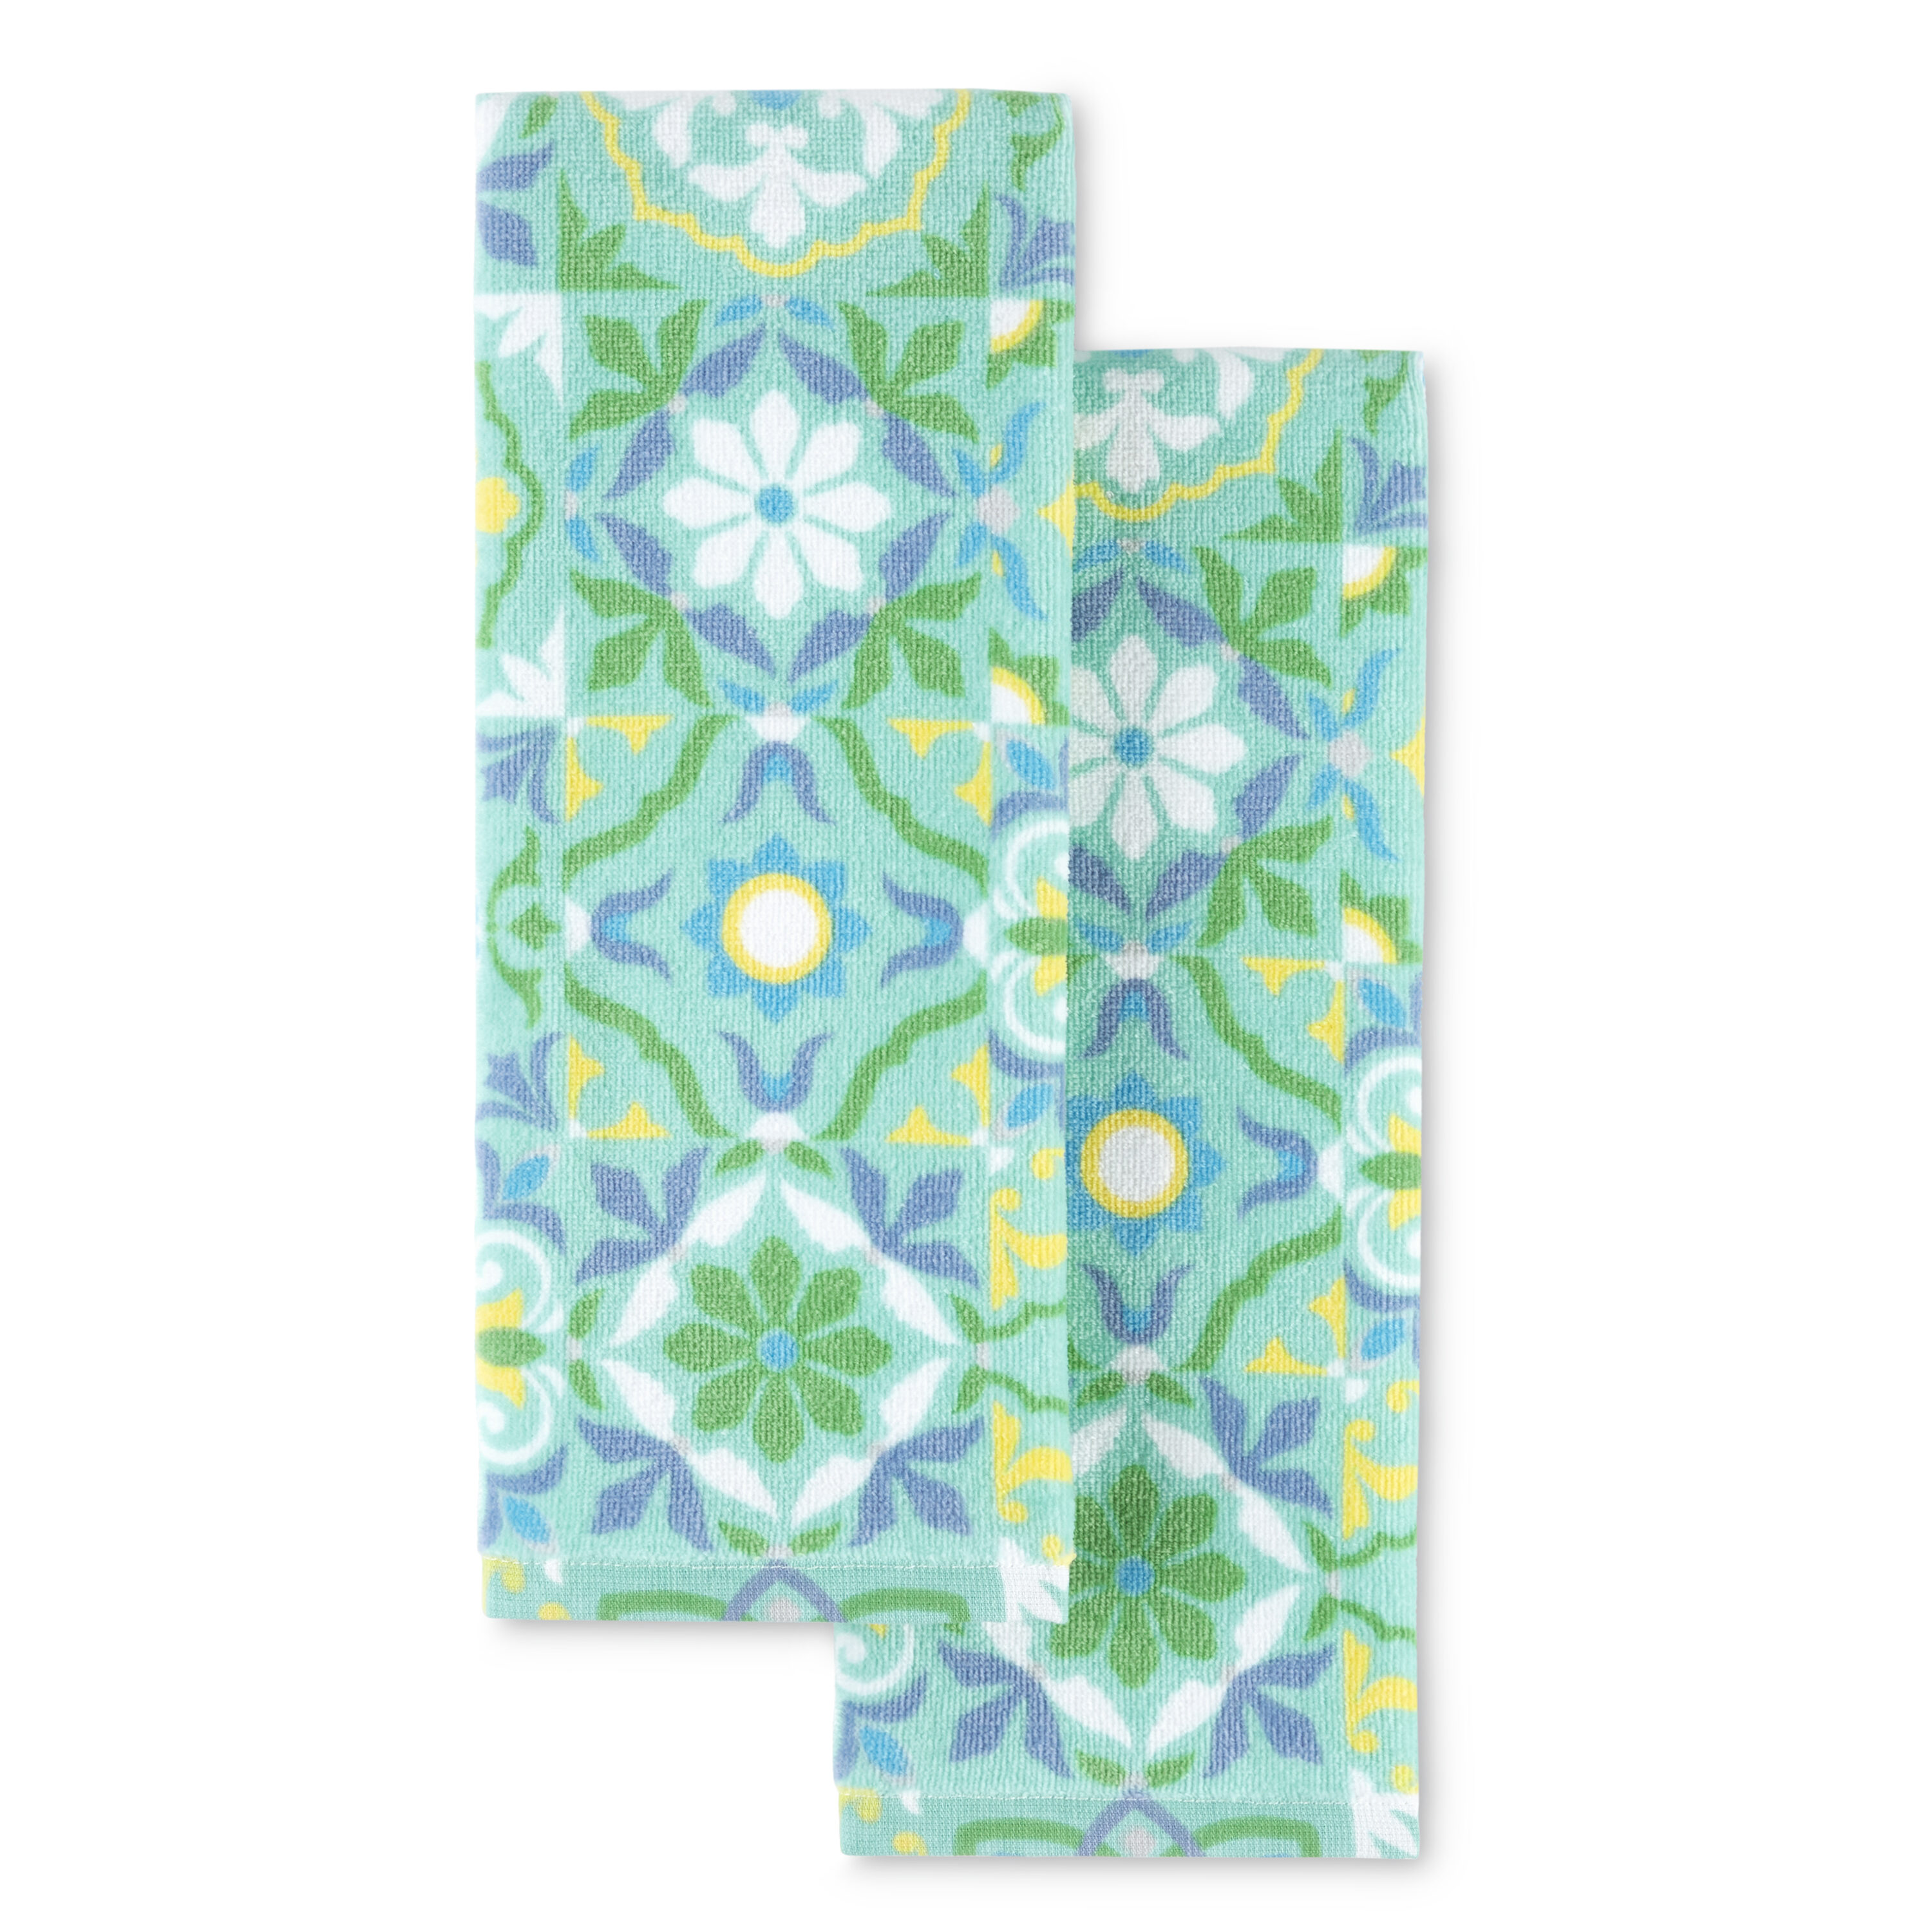  2 Packs Kitchen Towels and Dishcloths Sets, Abstract